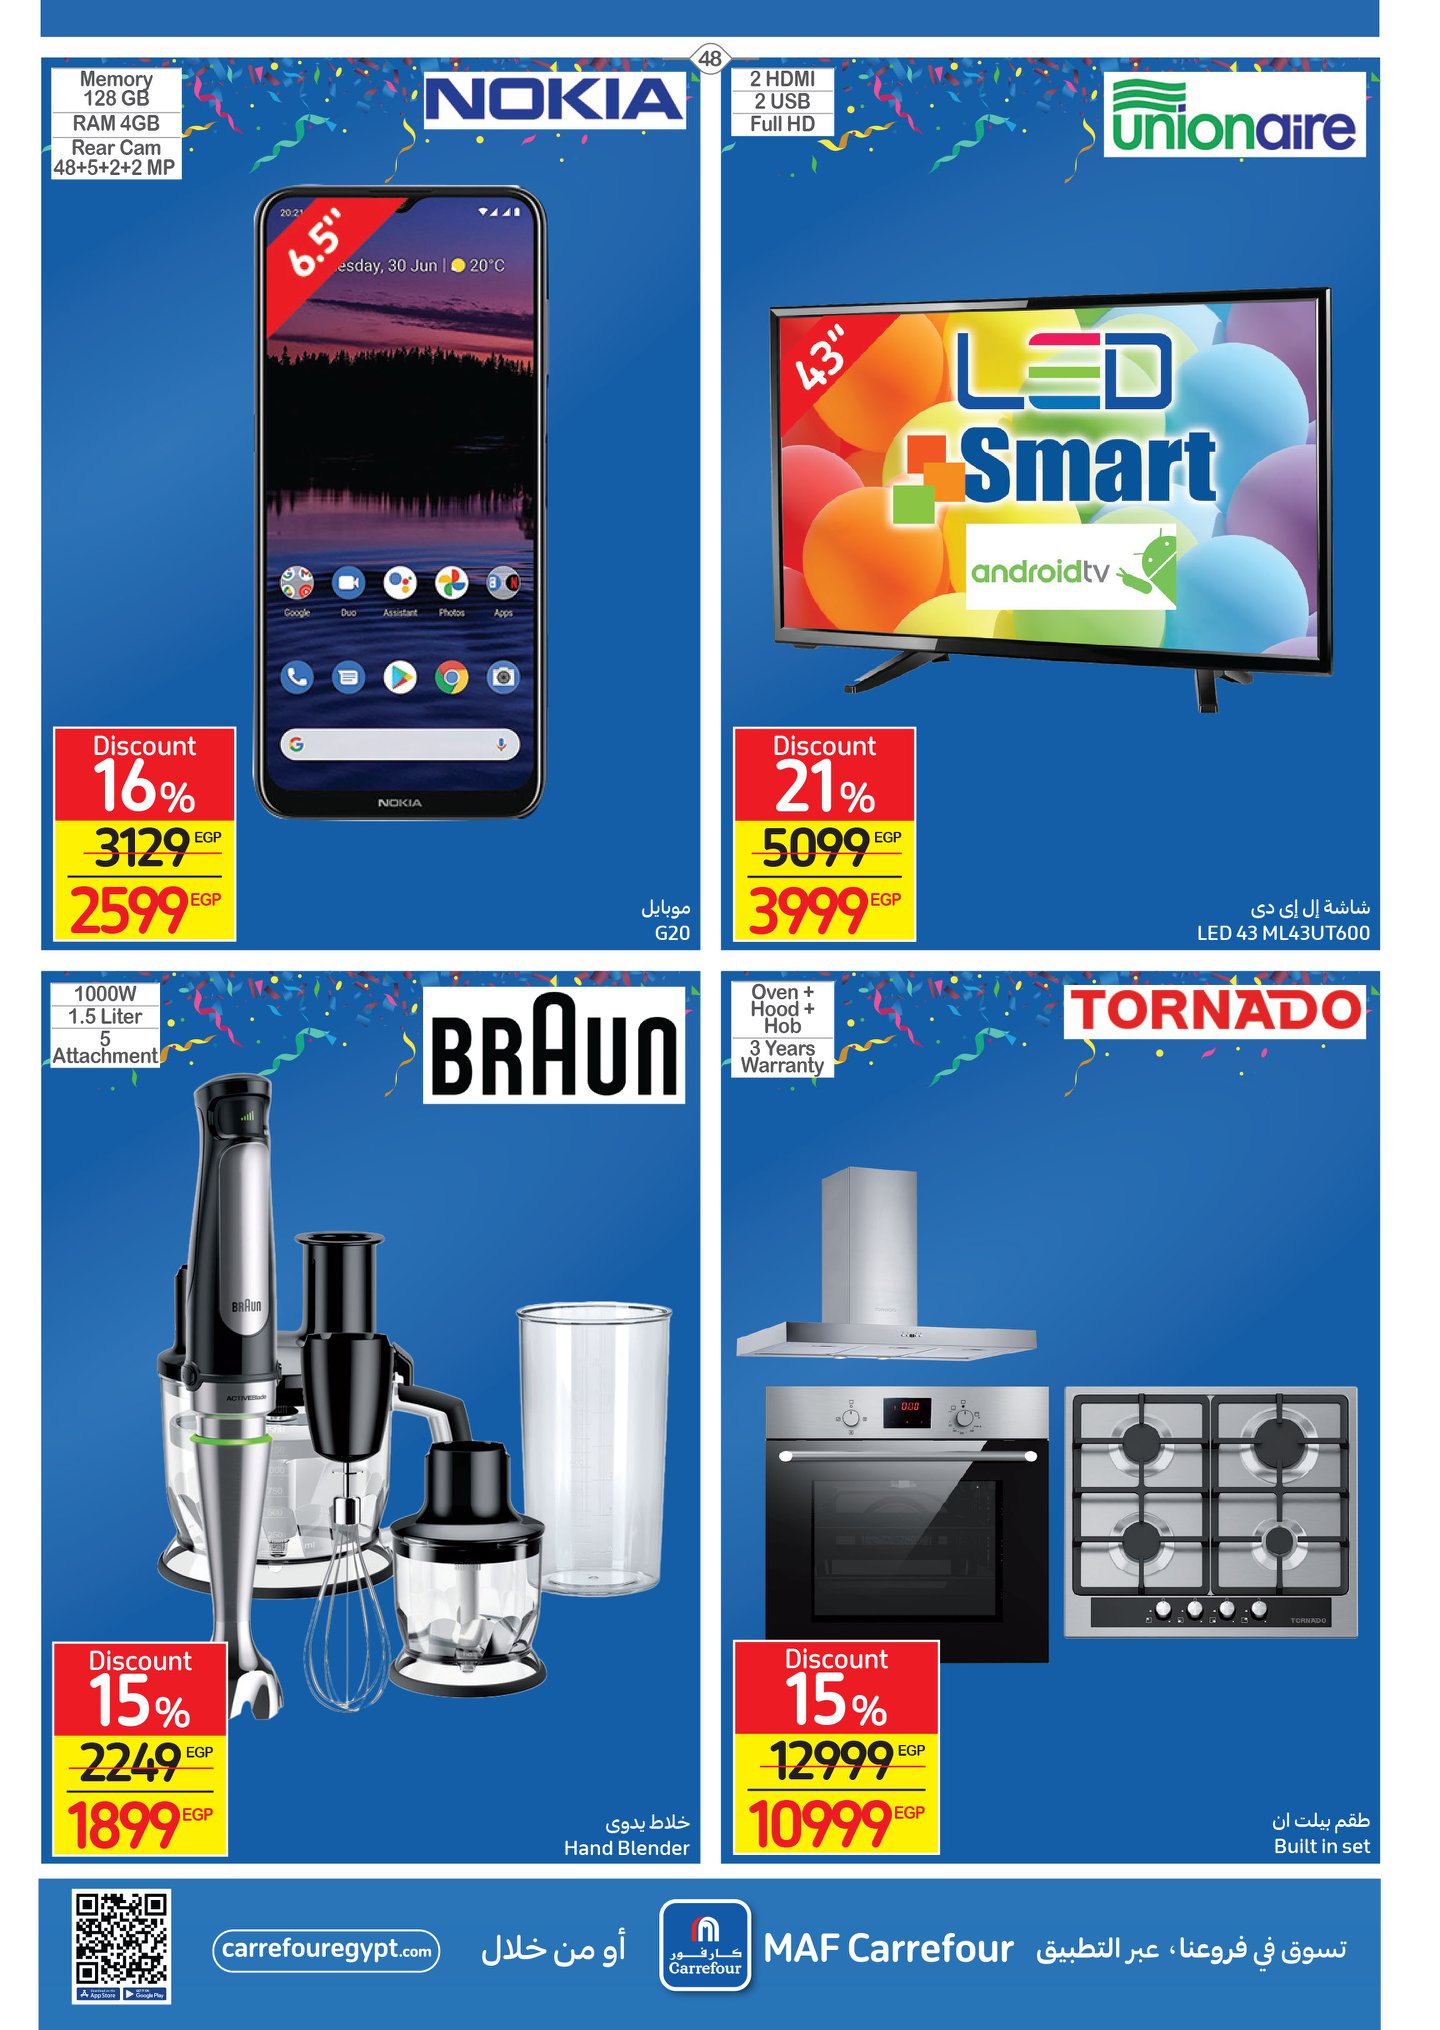 Carrefour magazine offers complete with 50% discounts and a surprise purchase in convenient installments without interest 16